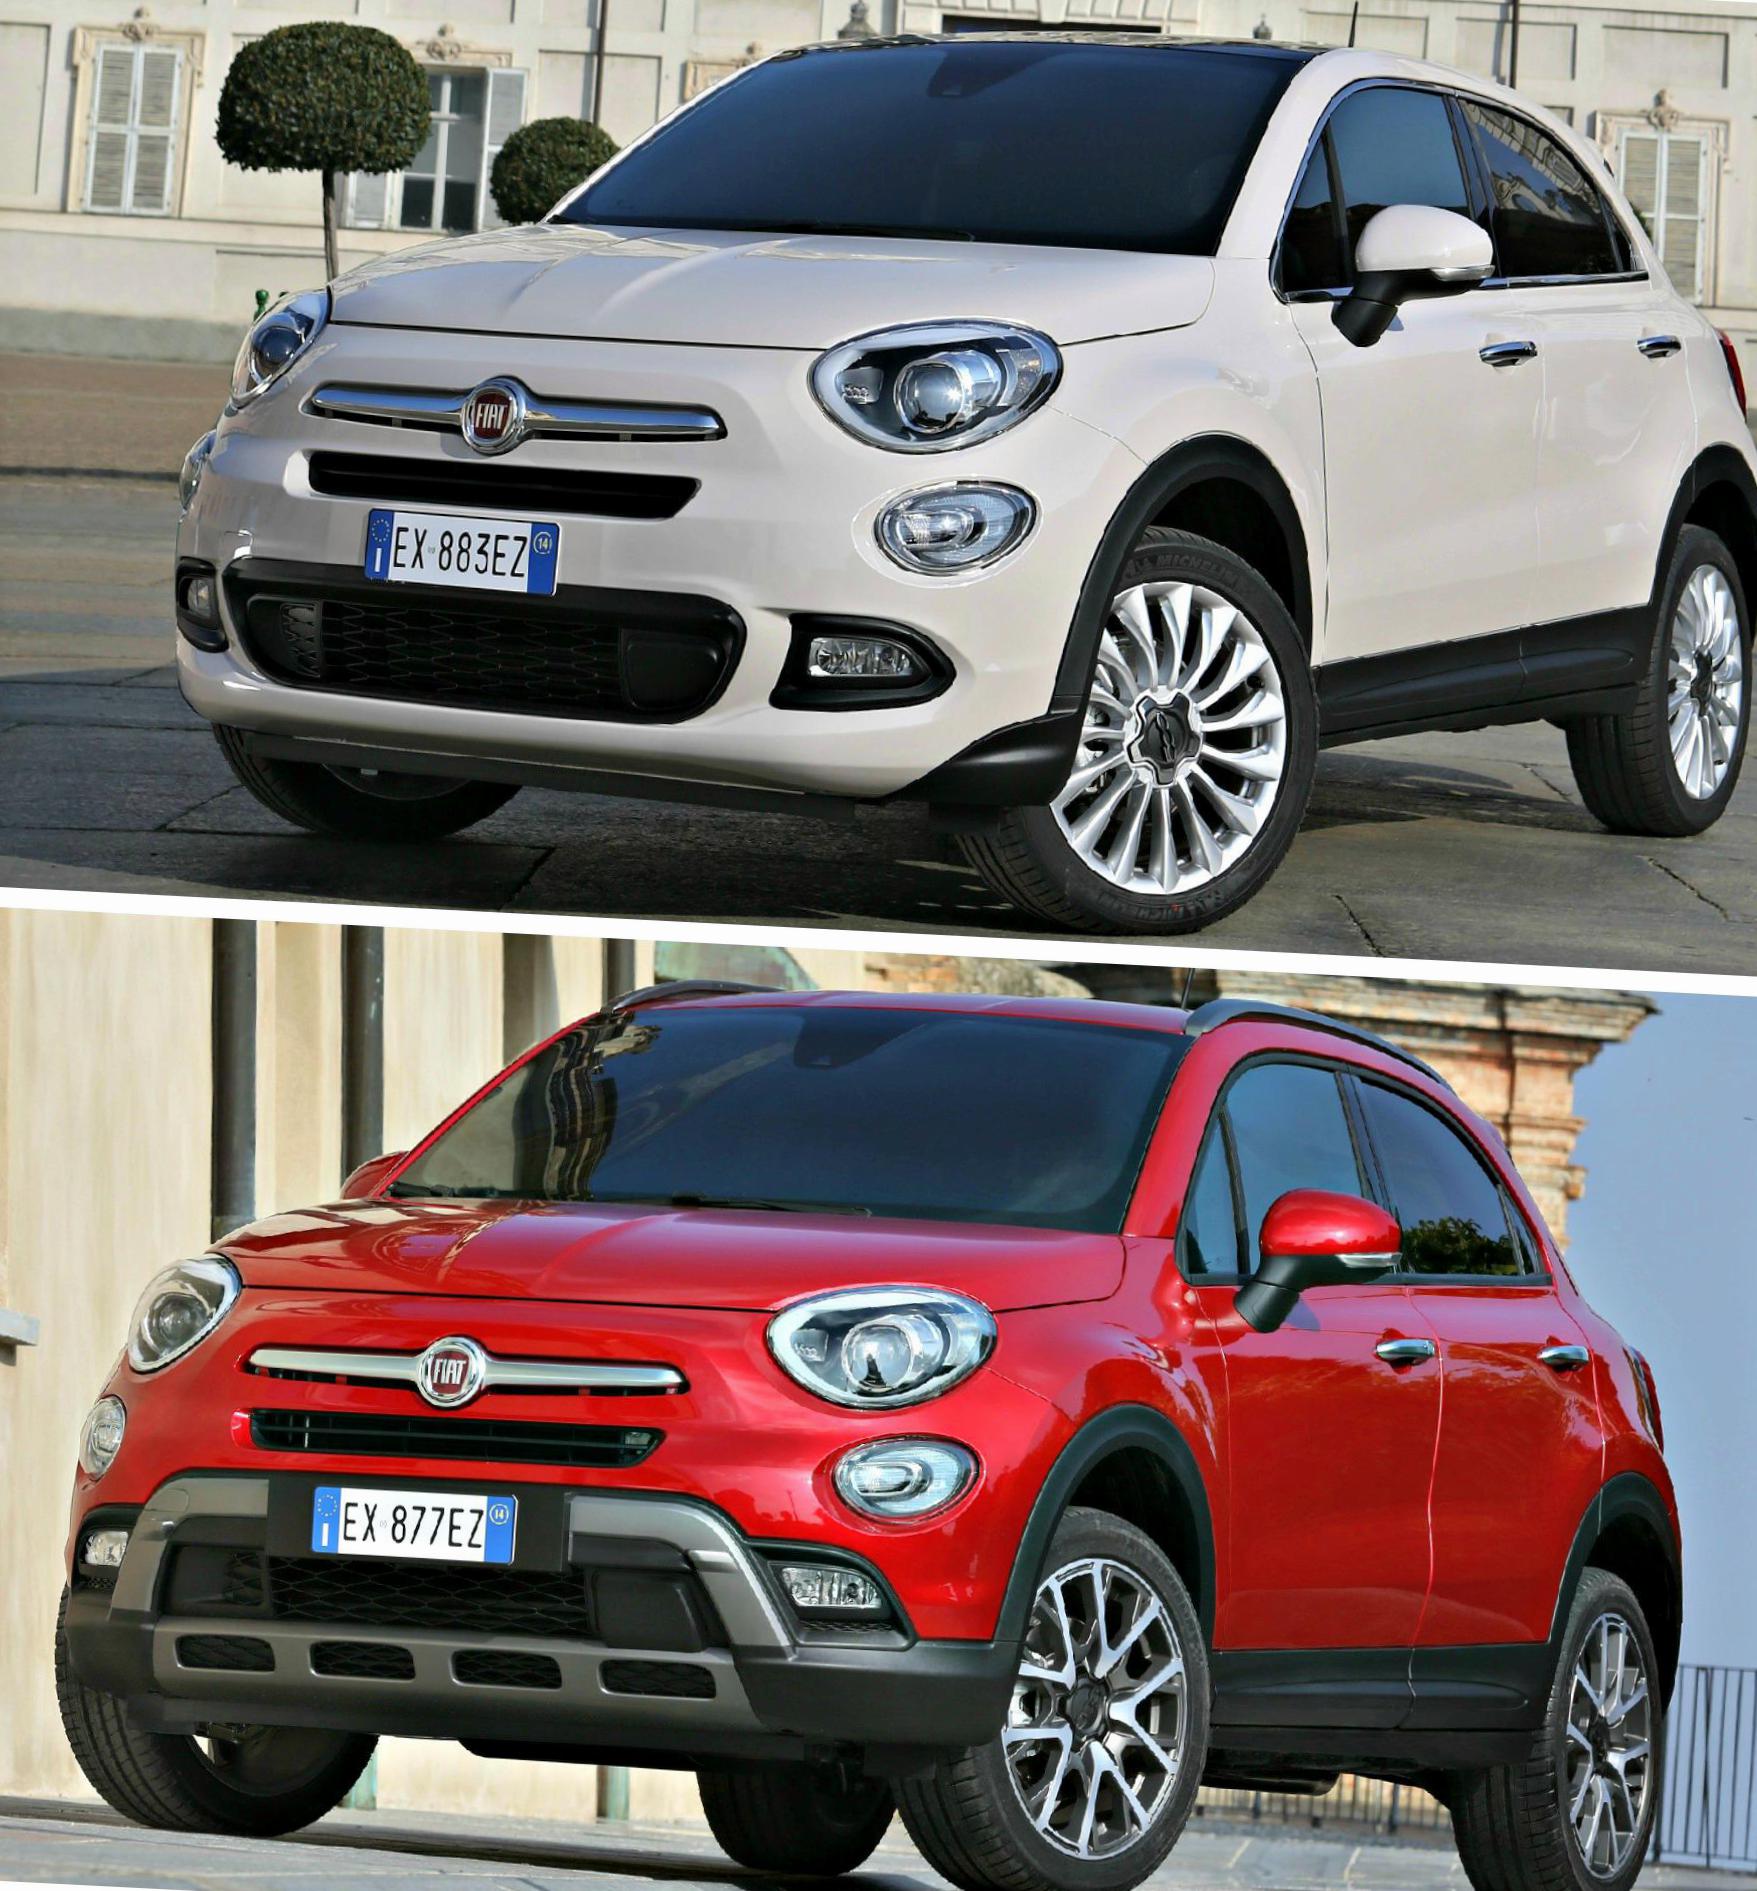 Fiat 500x Off Road Look Photos And Specs Photo 500x Off Road Look Fiat Tuning And 16 Perfect Photos Of Fiat 500x Off Road Look